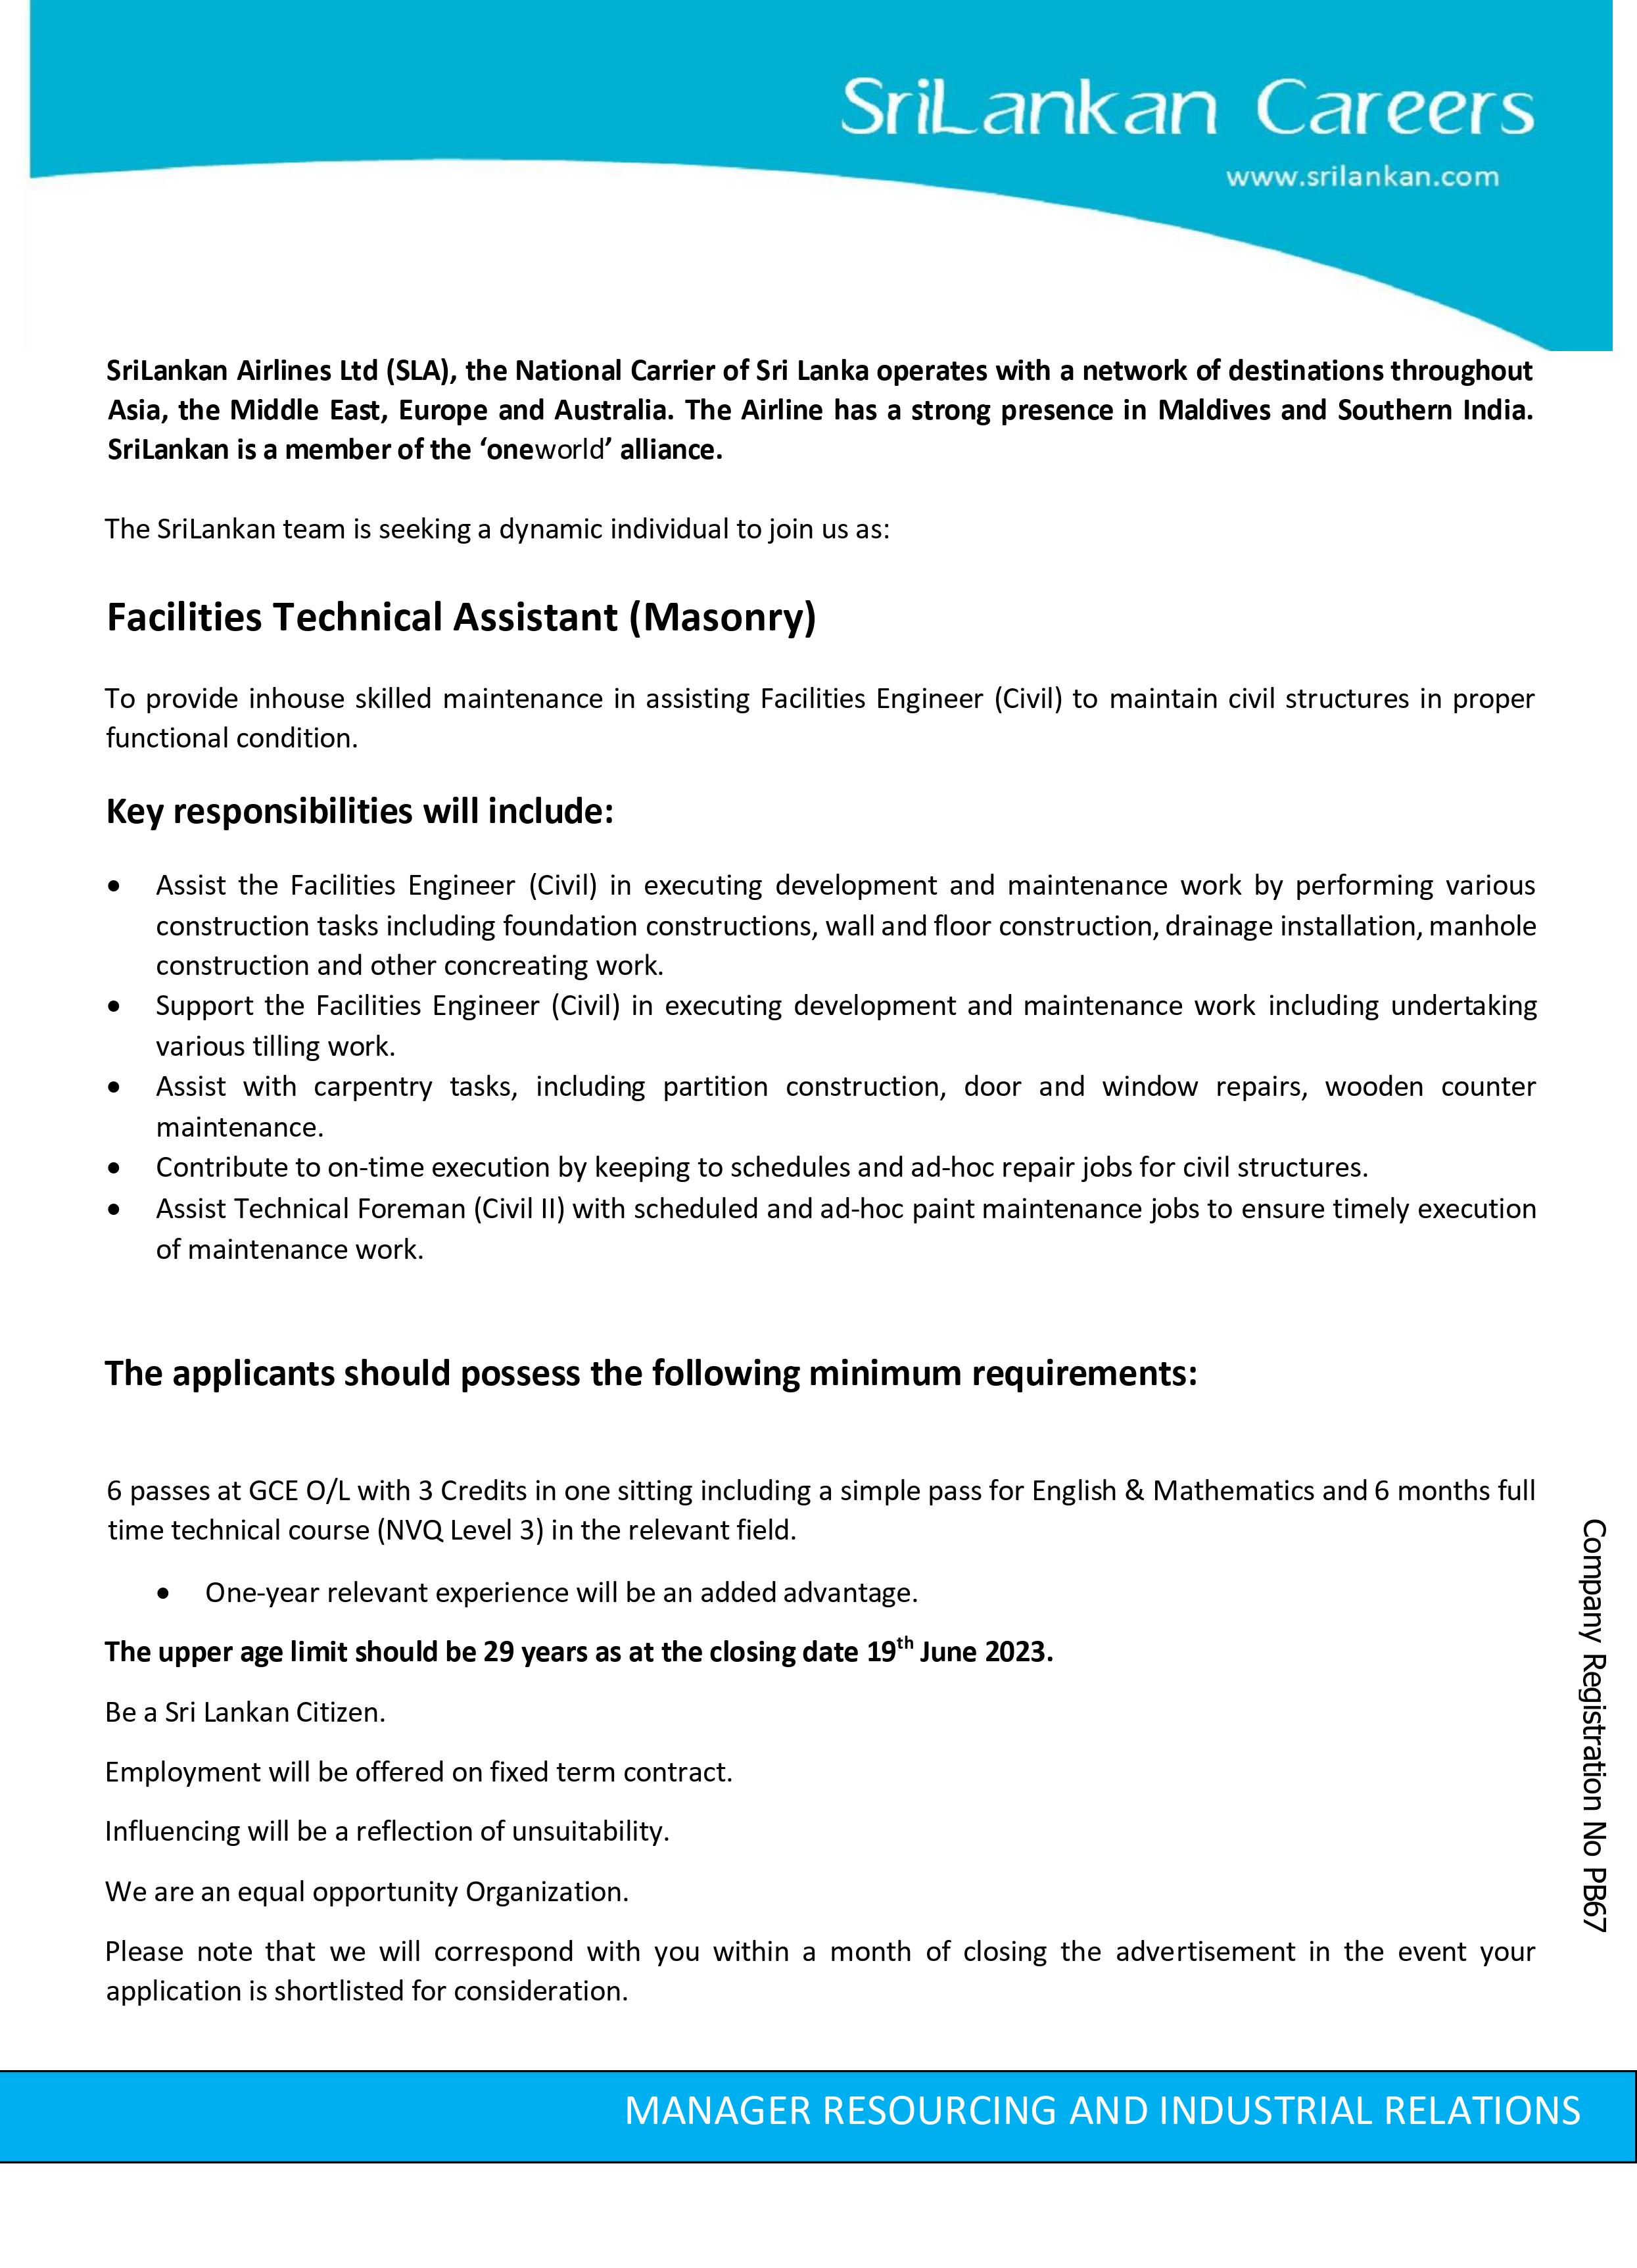 Facilities Technical Assistant - Sri Lankan Airlines